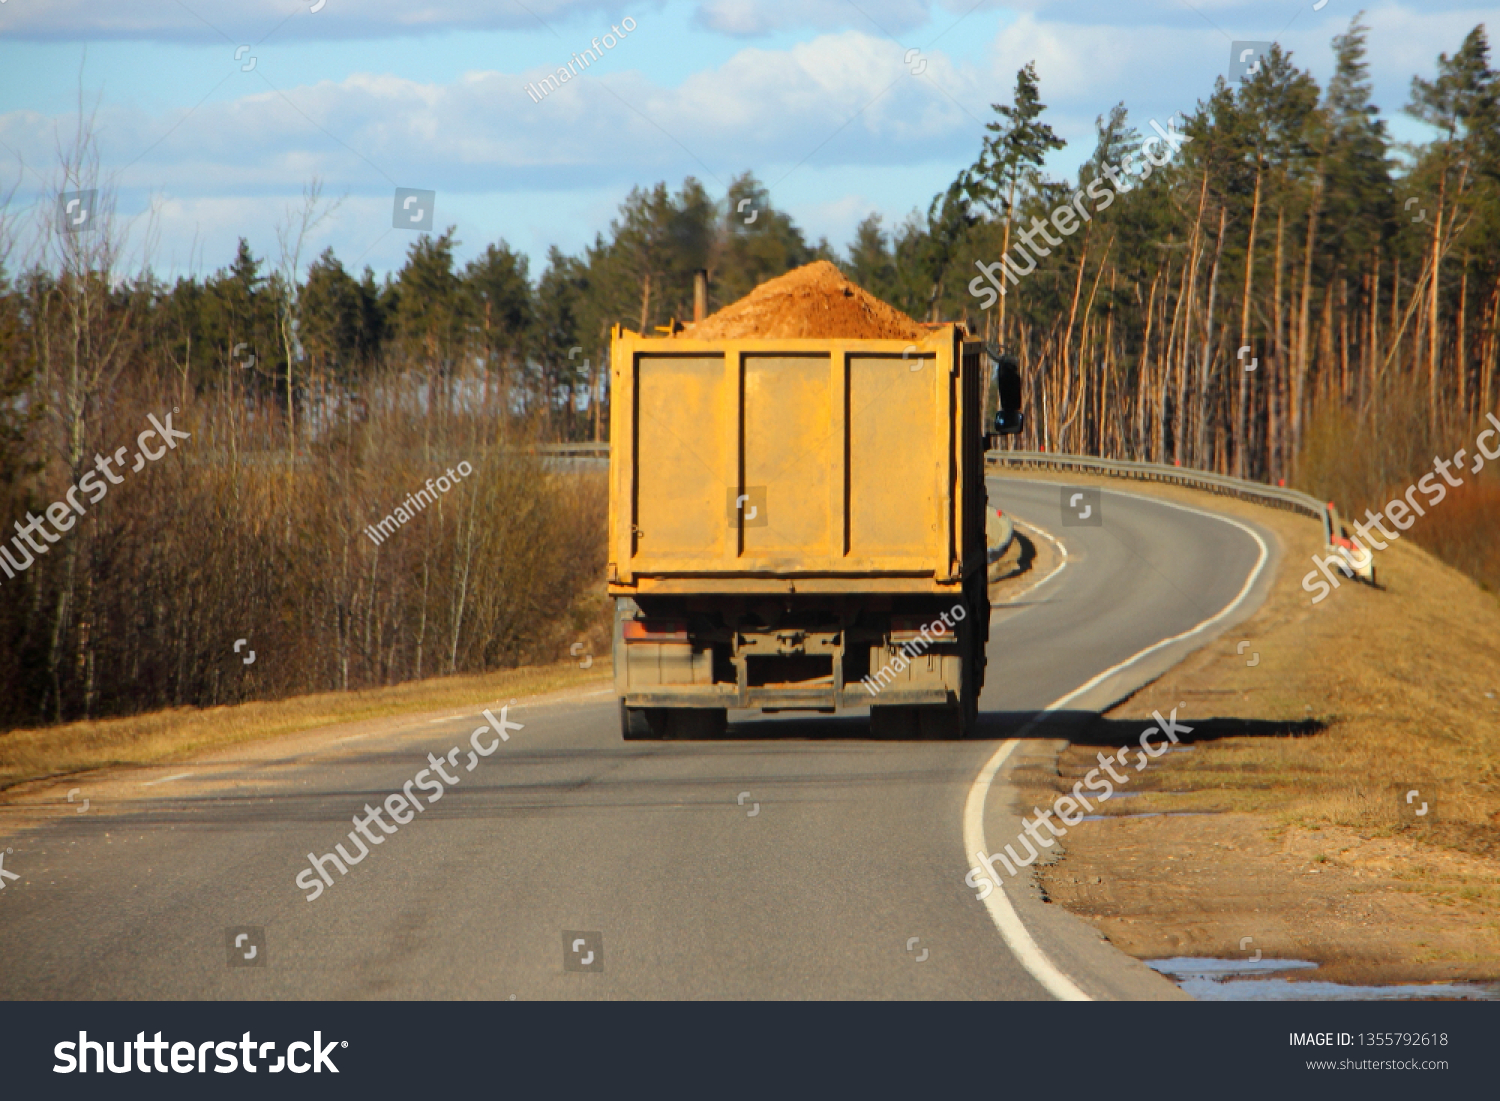 Transportation of bulk building materials, heavy overloaded dump truck carries sand on a European countryside one way asphalt serpentine road turn on pine forest and blue sky background at autumn day #1355792618